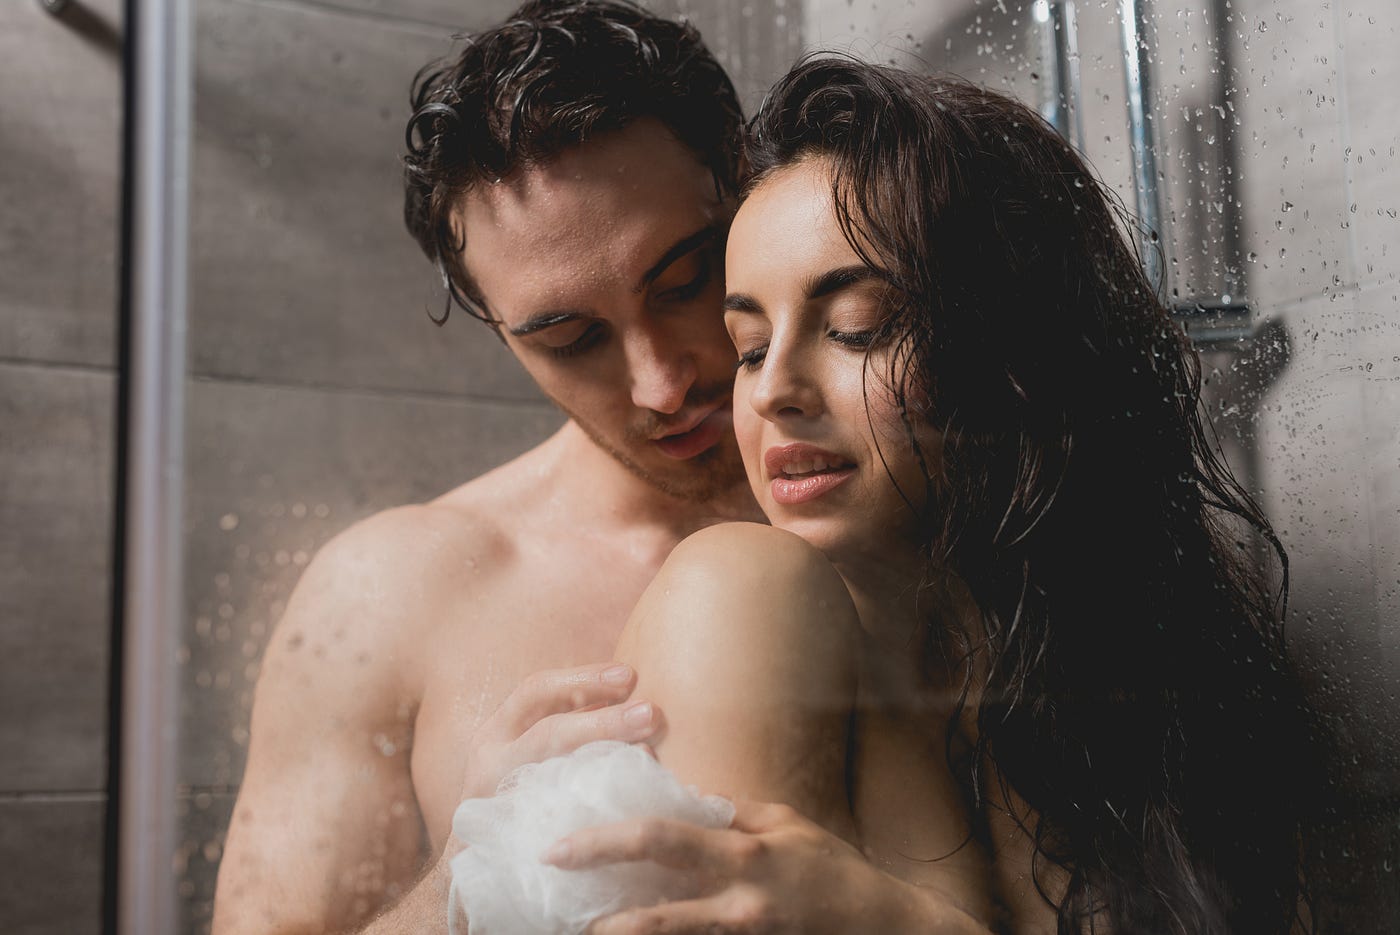 3 Reasons to Try Showering With Your Partner Enjoy this wet path to intimacy Sex…With a Side of Quirk